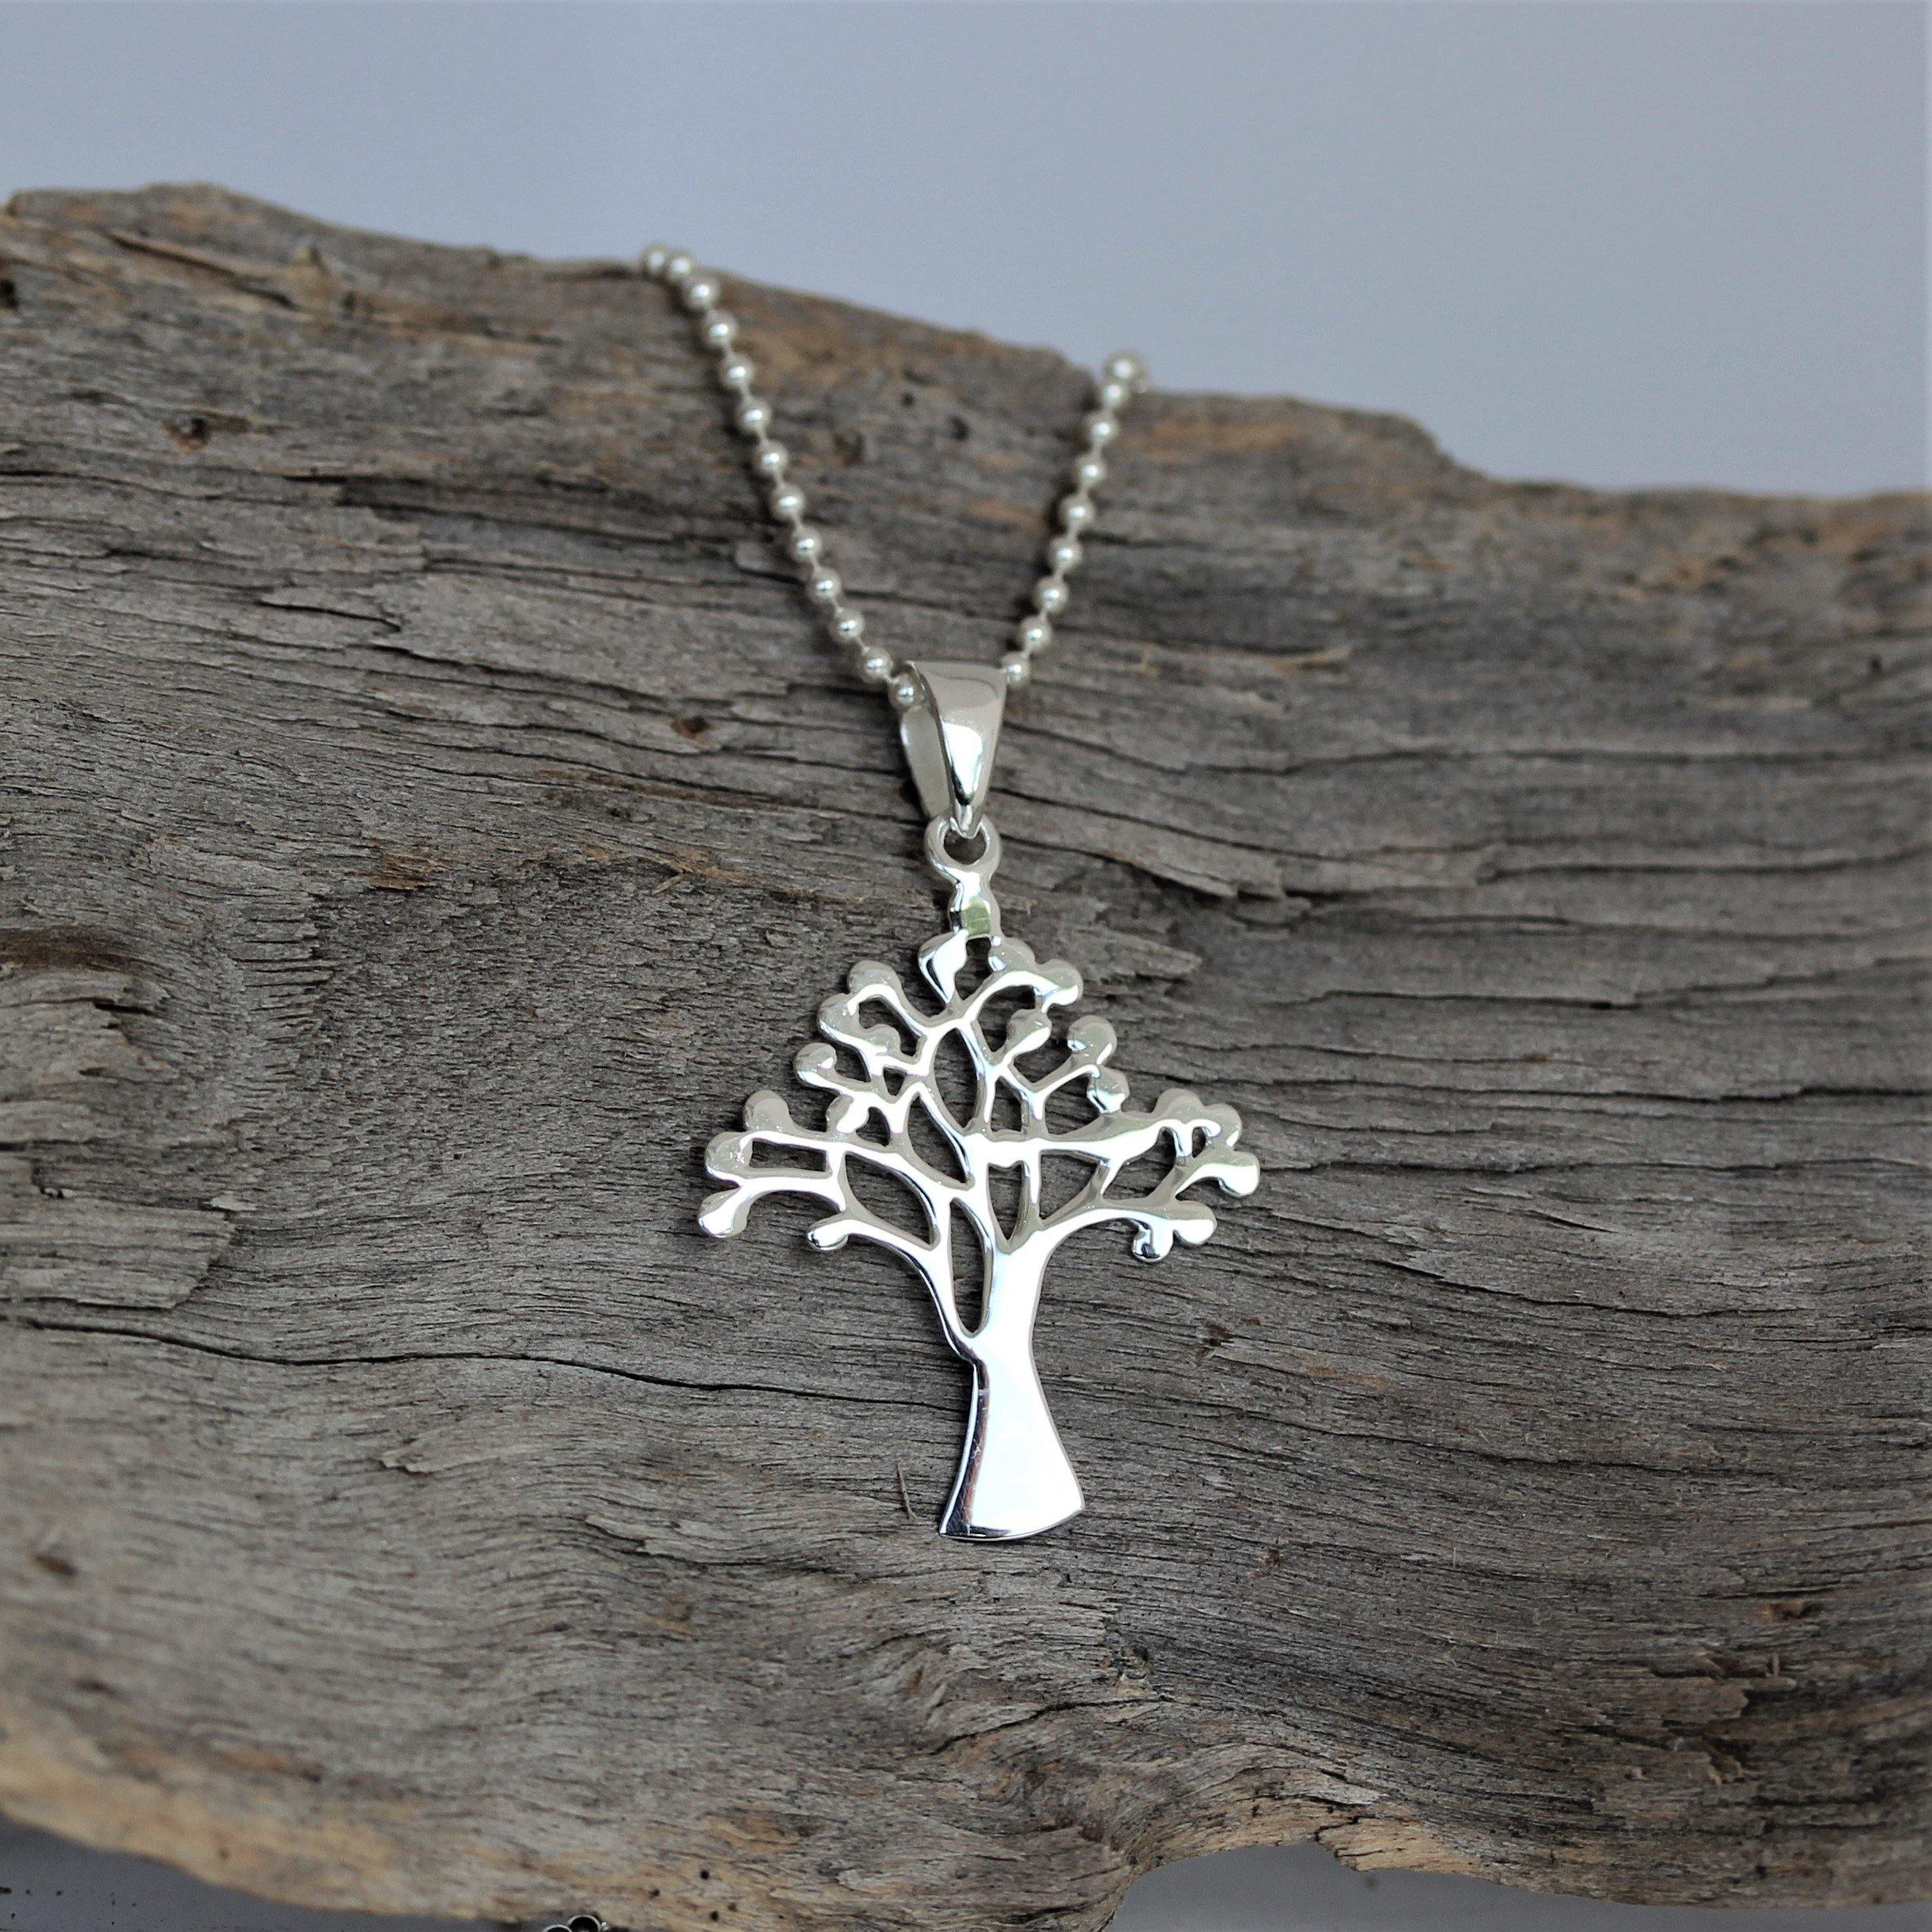 Sterling Silver Tree of Life Pendant & Ball Chain Necklace - STERLING SILVER DESIGNS